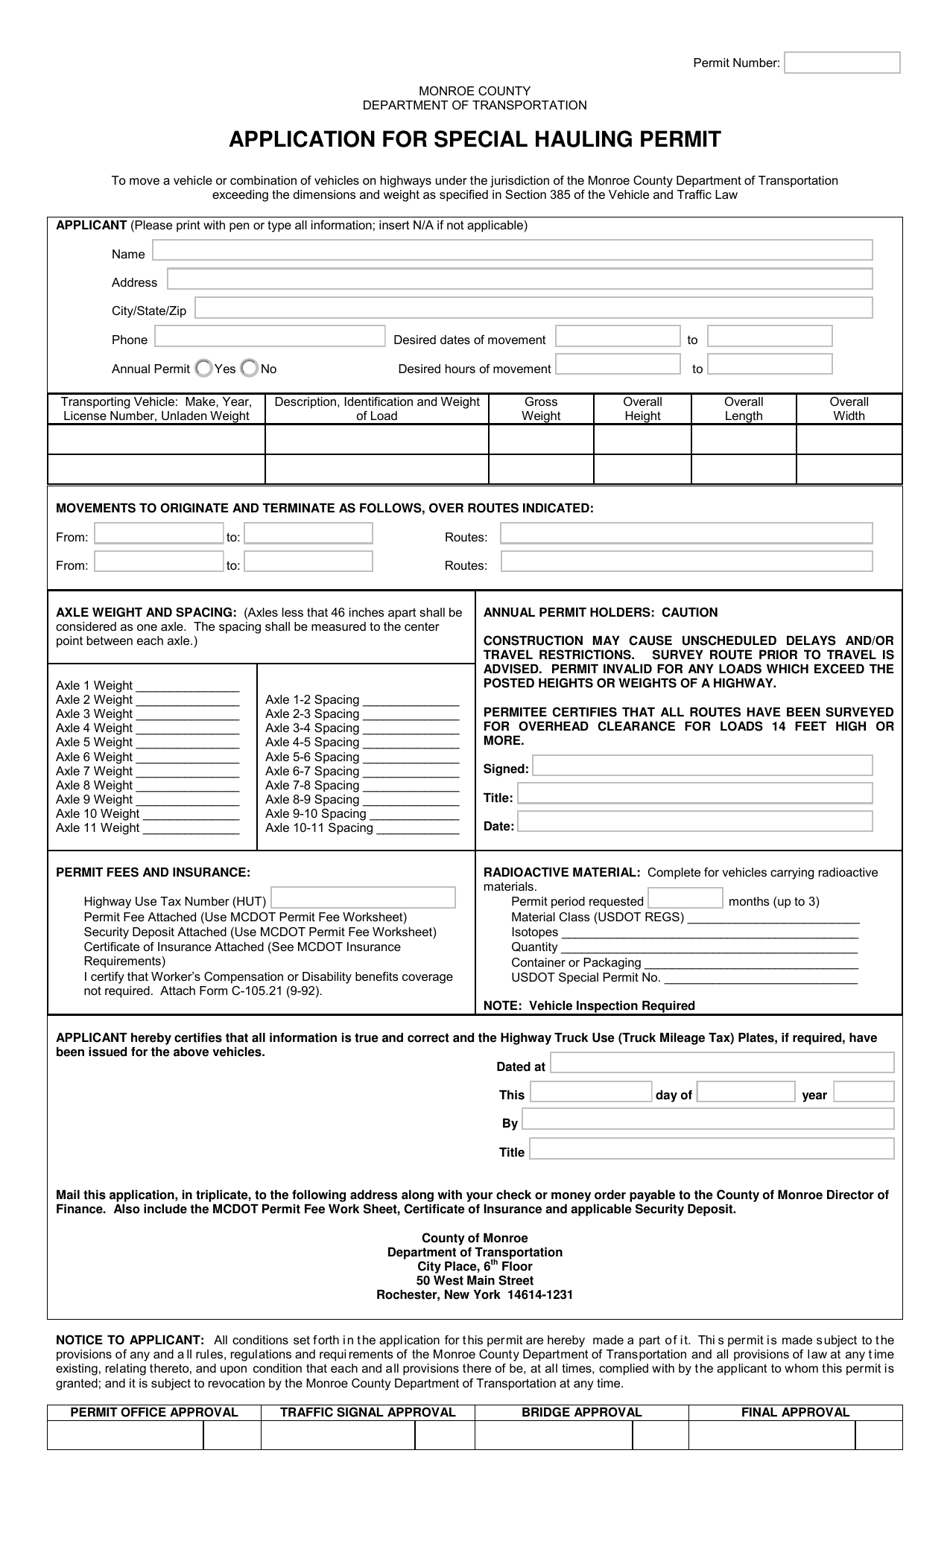 Application for Special Hauling Permit - Monroe County, New York, Page 1